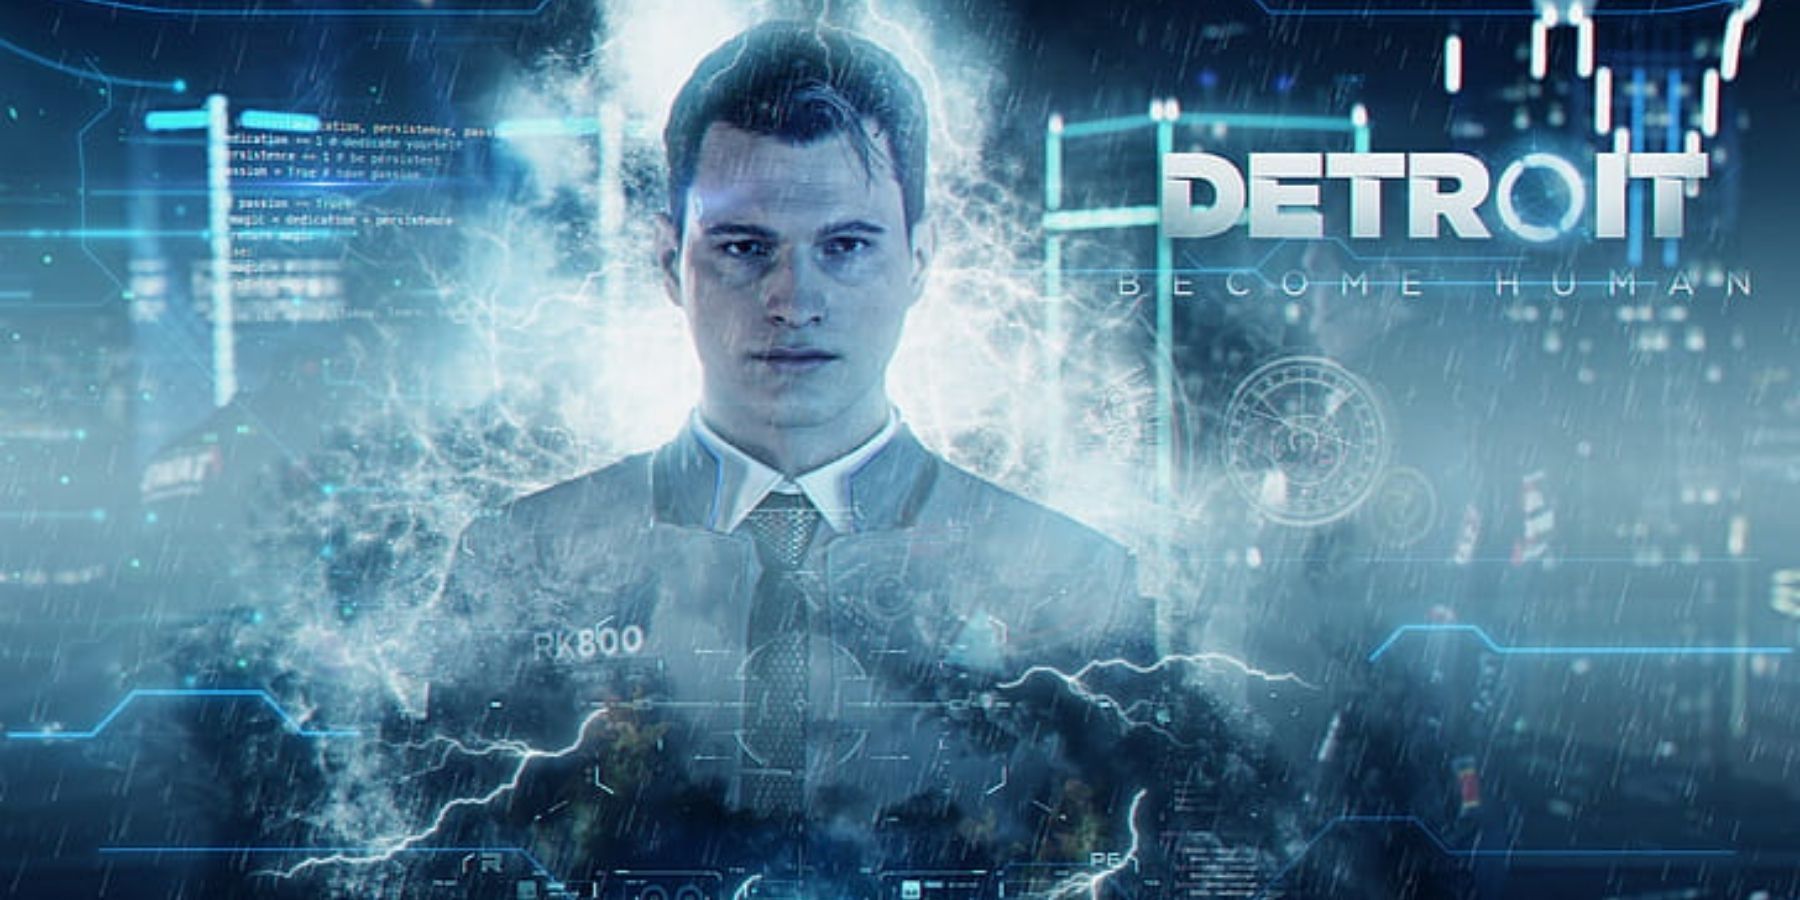 Connor in Detroit: Become Human